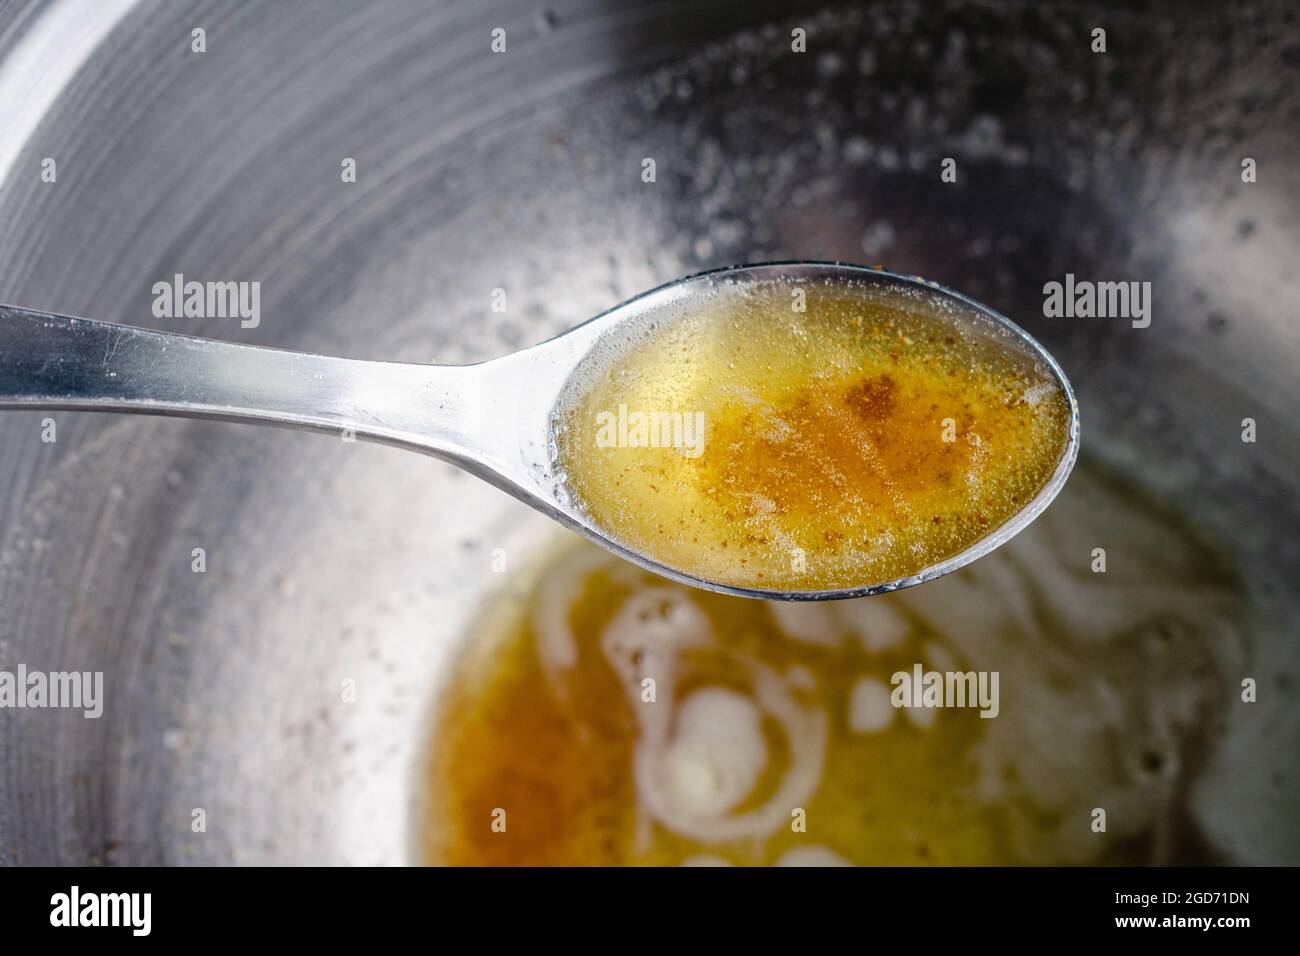 Closeup View of a Tablespoon Full of Browned Butter: Browned butter in a spoon held over a mixing bowl Stock Photo